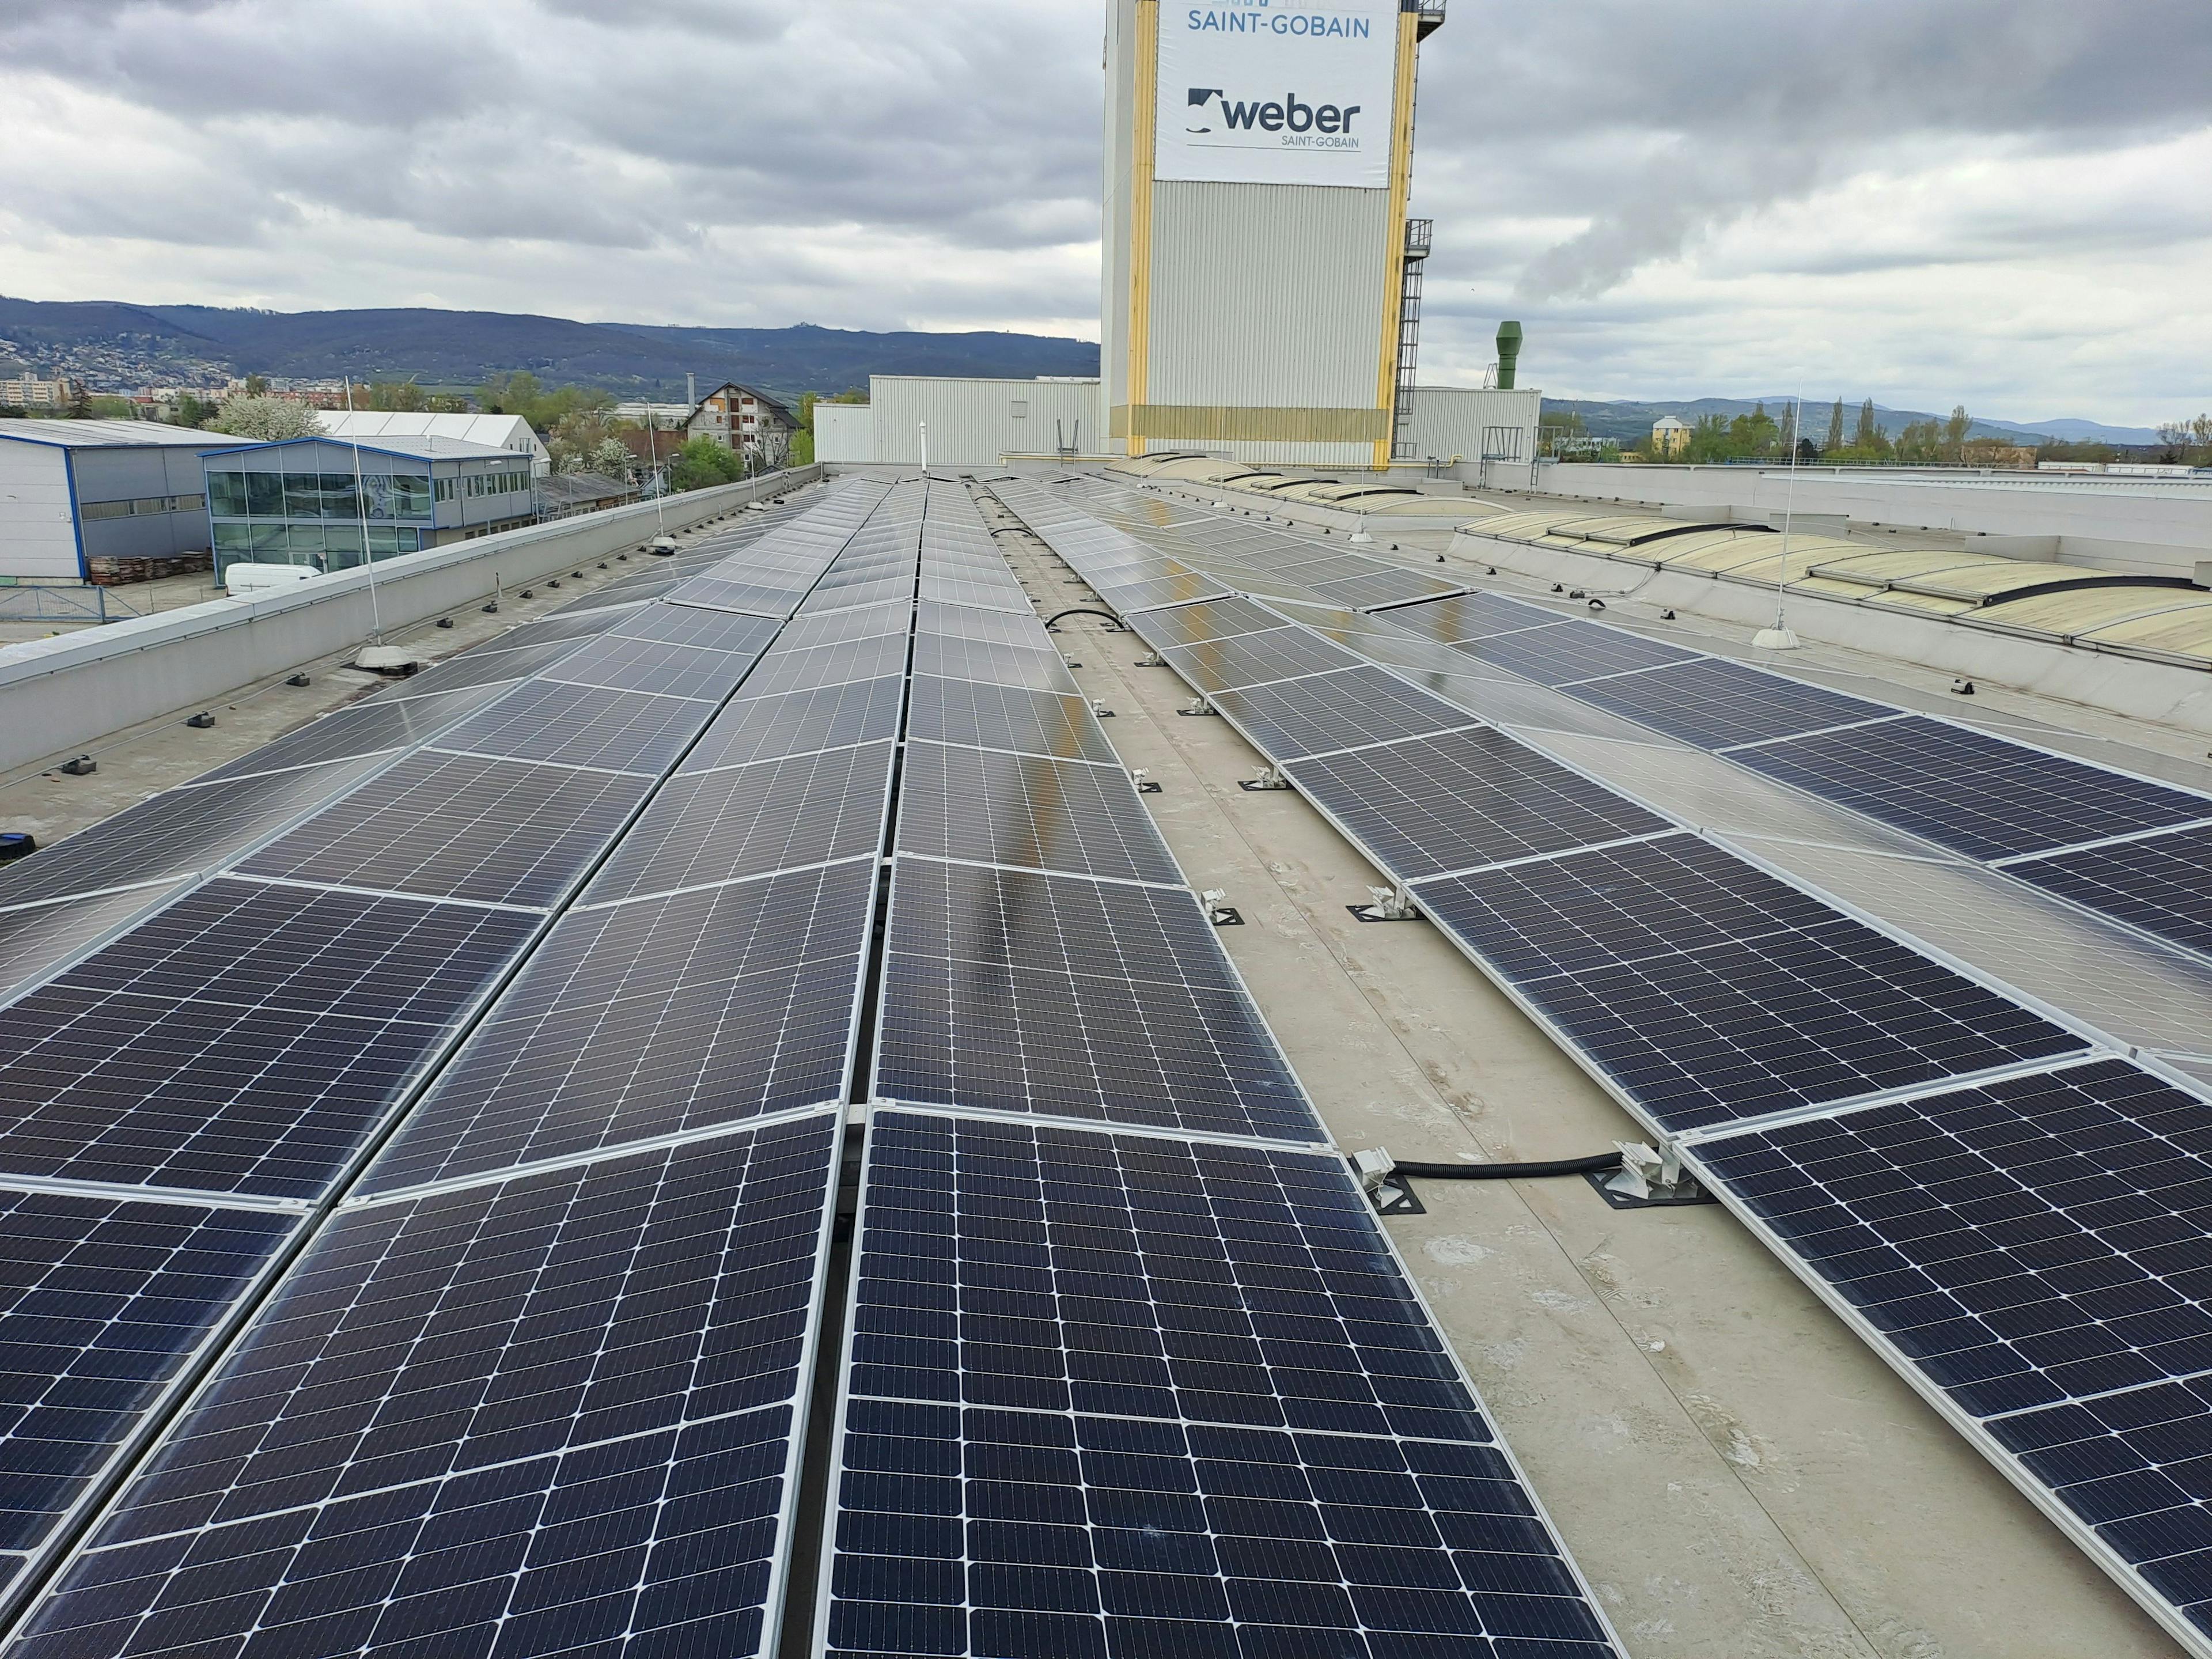 PV panels in Slovakia